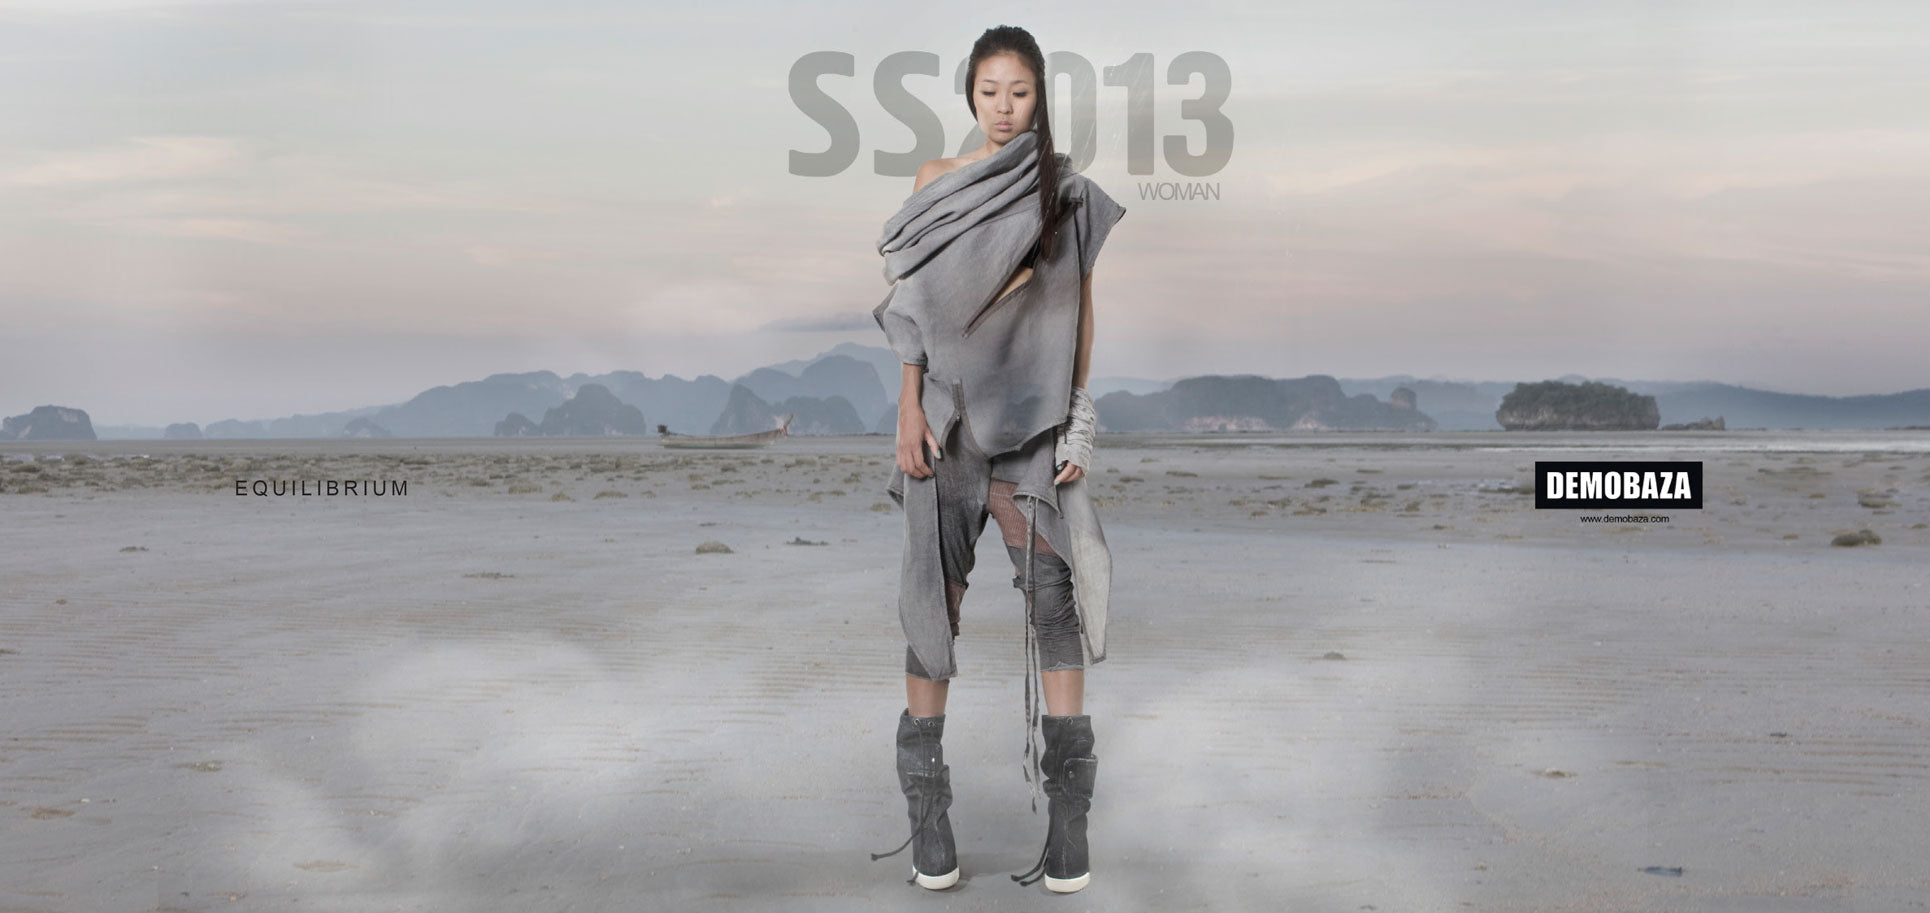 WOMAN SS13 / EQUILIBRIUM